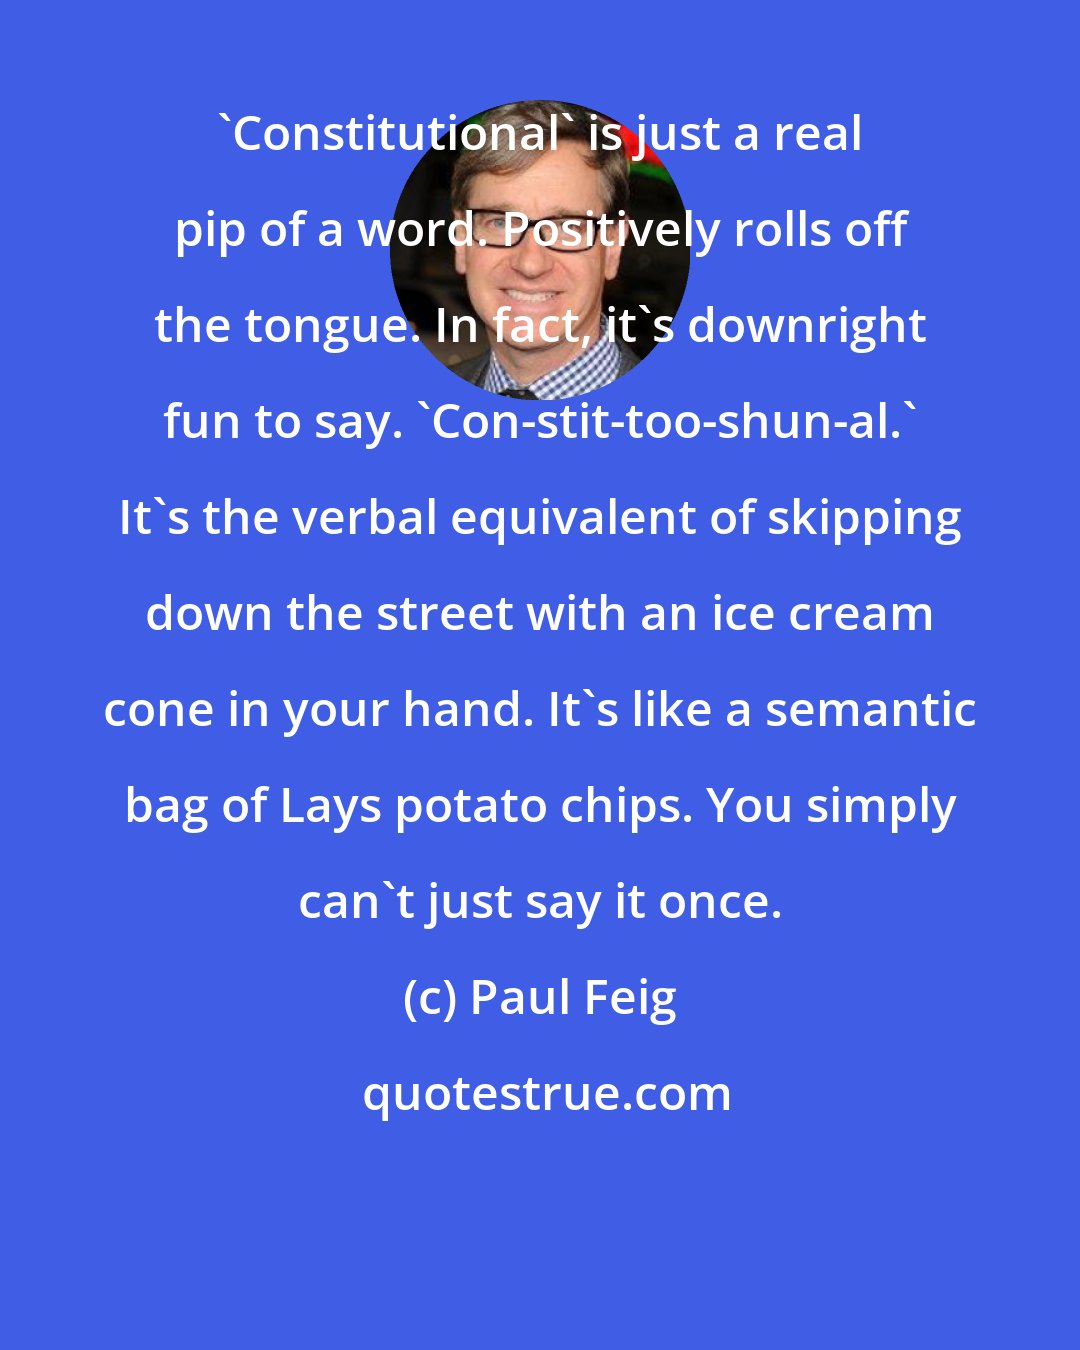 Paul Feig: 'Constitutional' is just a real pip of a word. Positively rolls off the tongue. In fact, it's downright fun to say. 'Con-stit-too-shun-al.' It's the verbal equivalent of skipping down the street with an ice cream cone in your hand. It's like a semantic bag of Lays potato chips. You simply can't just say it once.